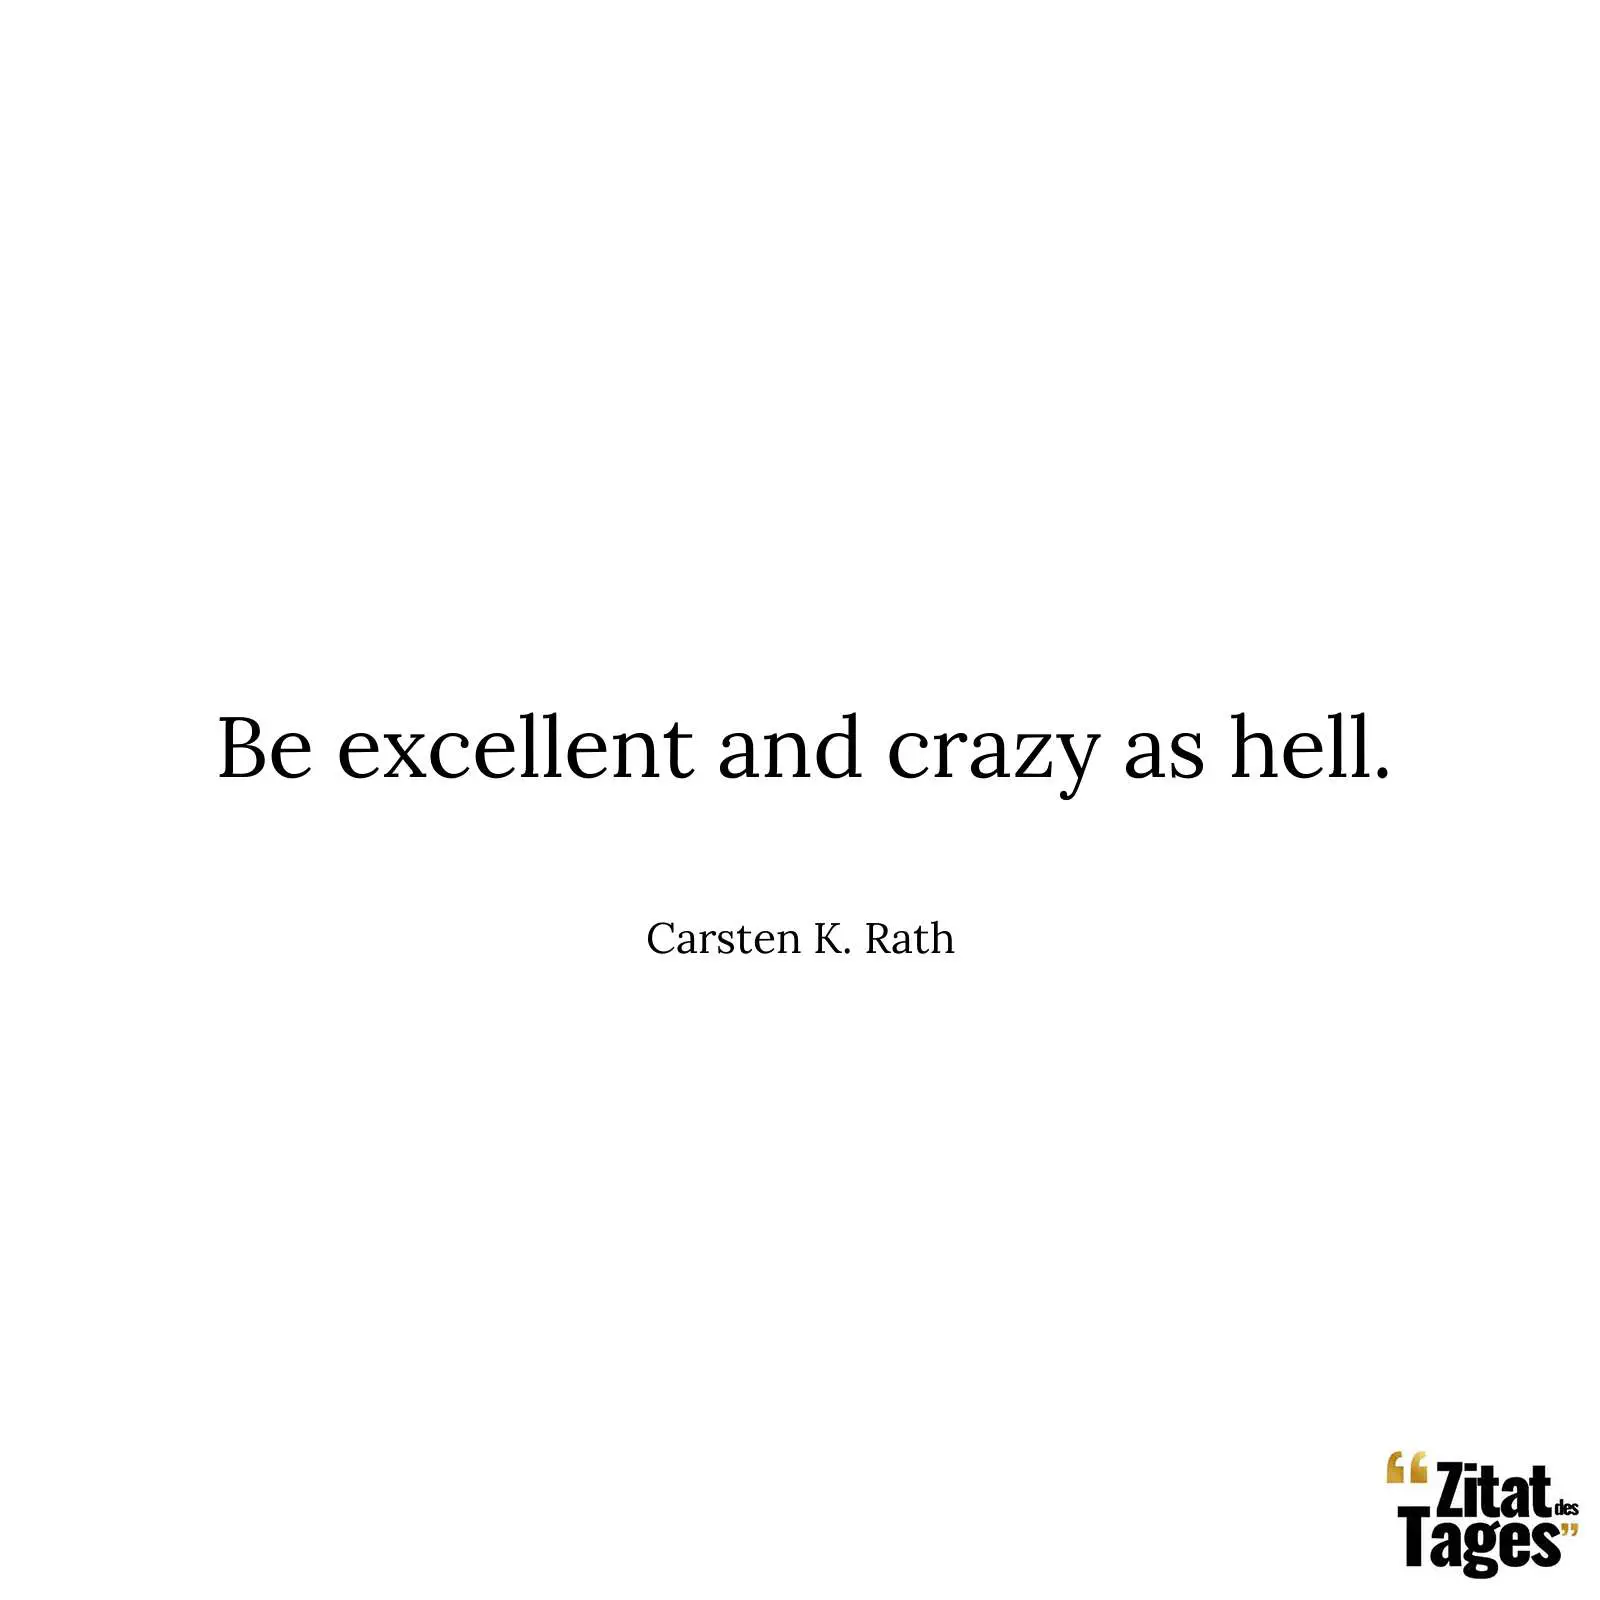 Be excellent and crazy as hell. - Carsten K. Rath